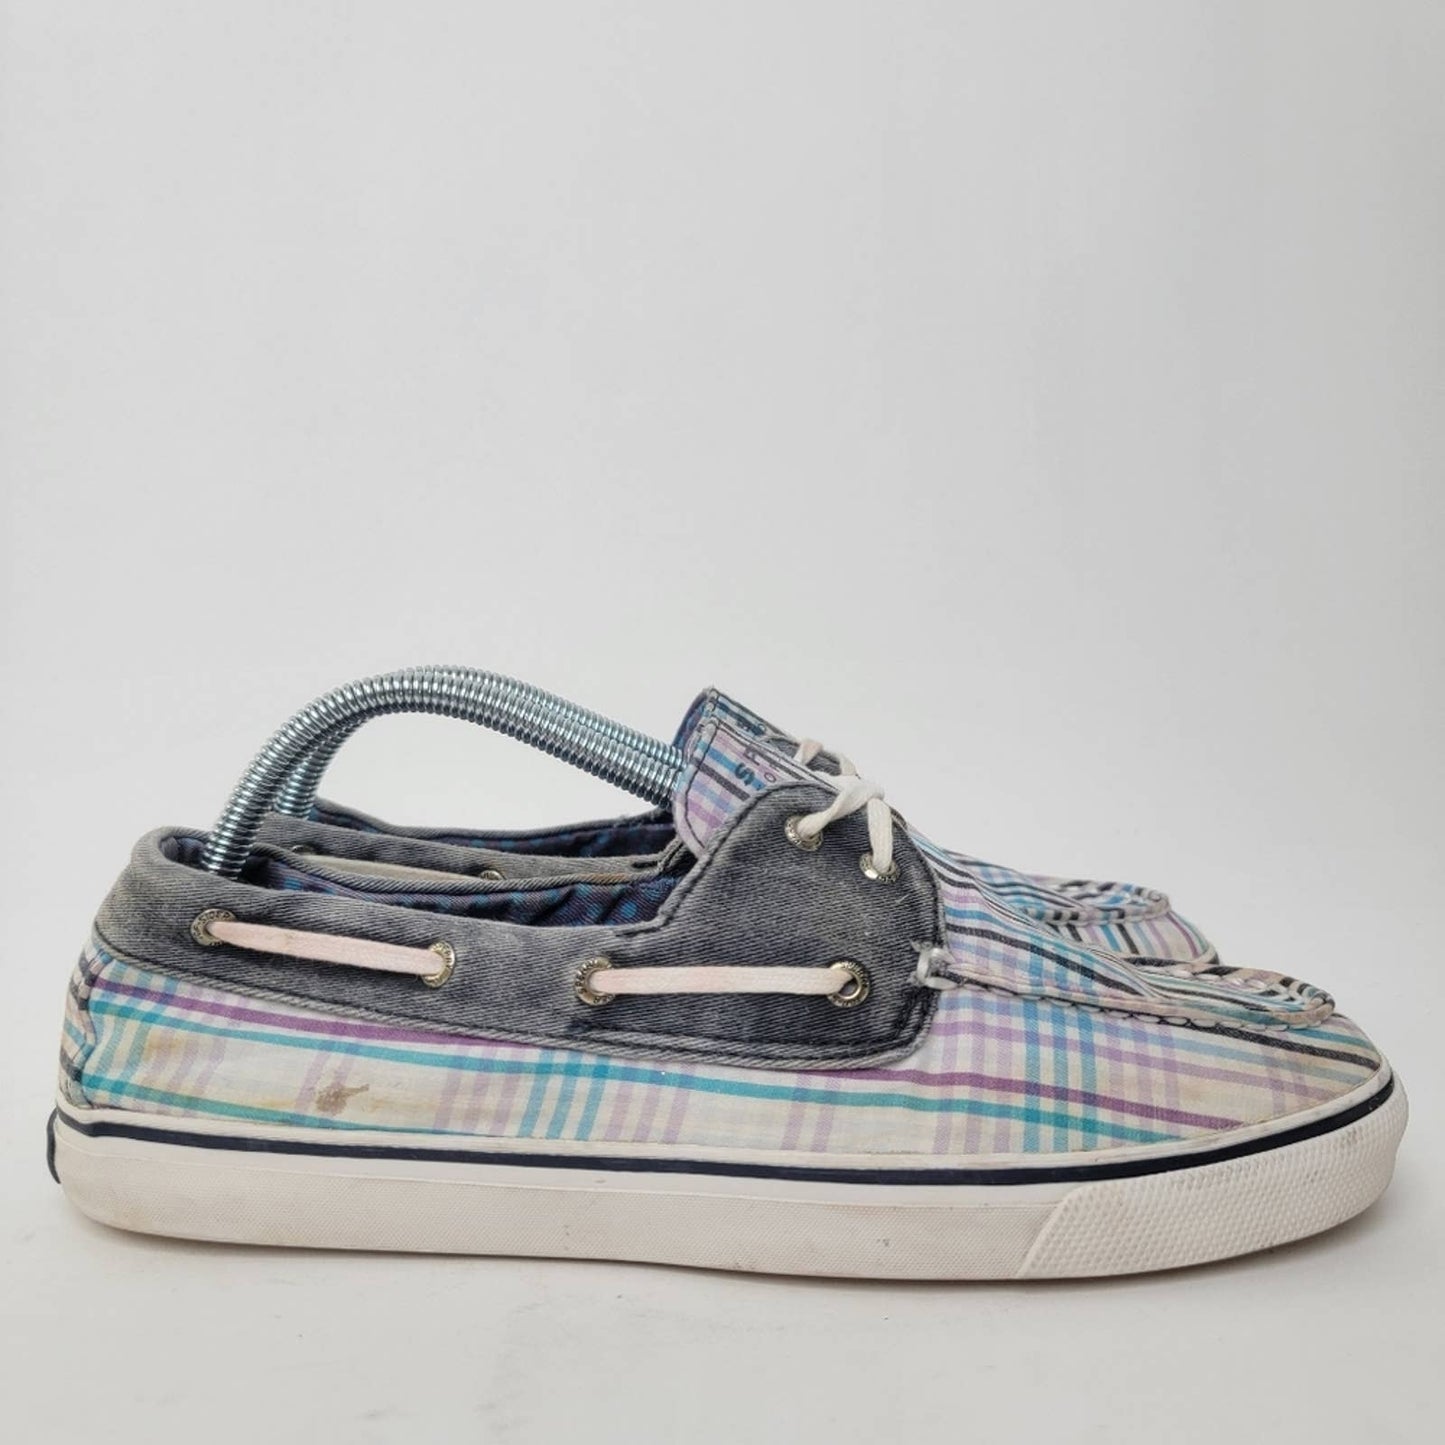 Sperry Top Sider Pastel Plaid Boat Shoes - 11